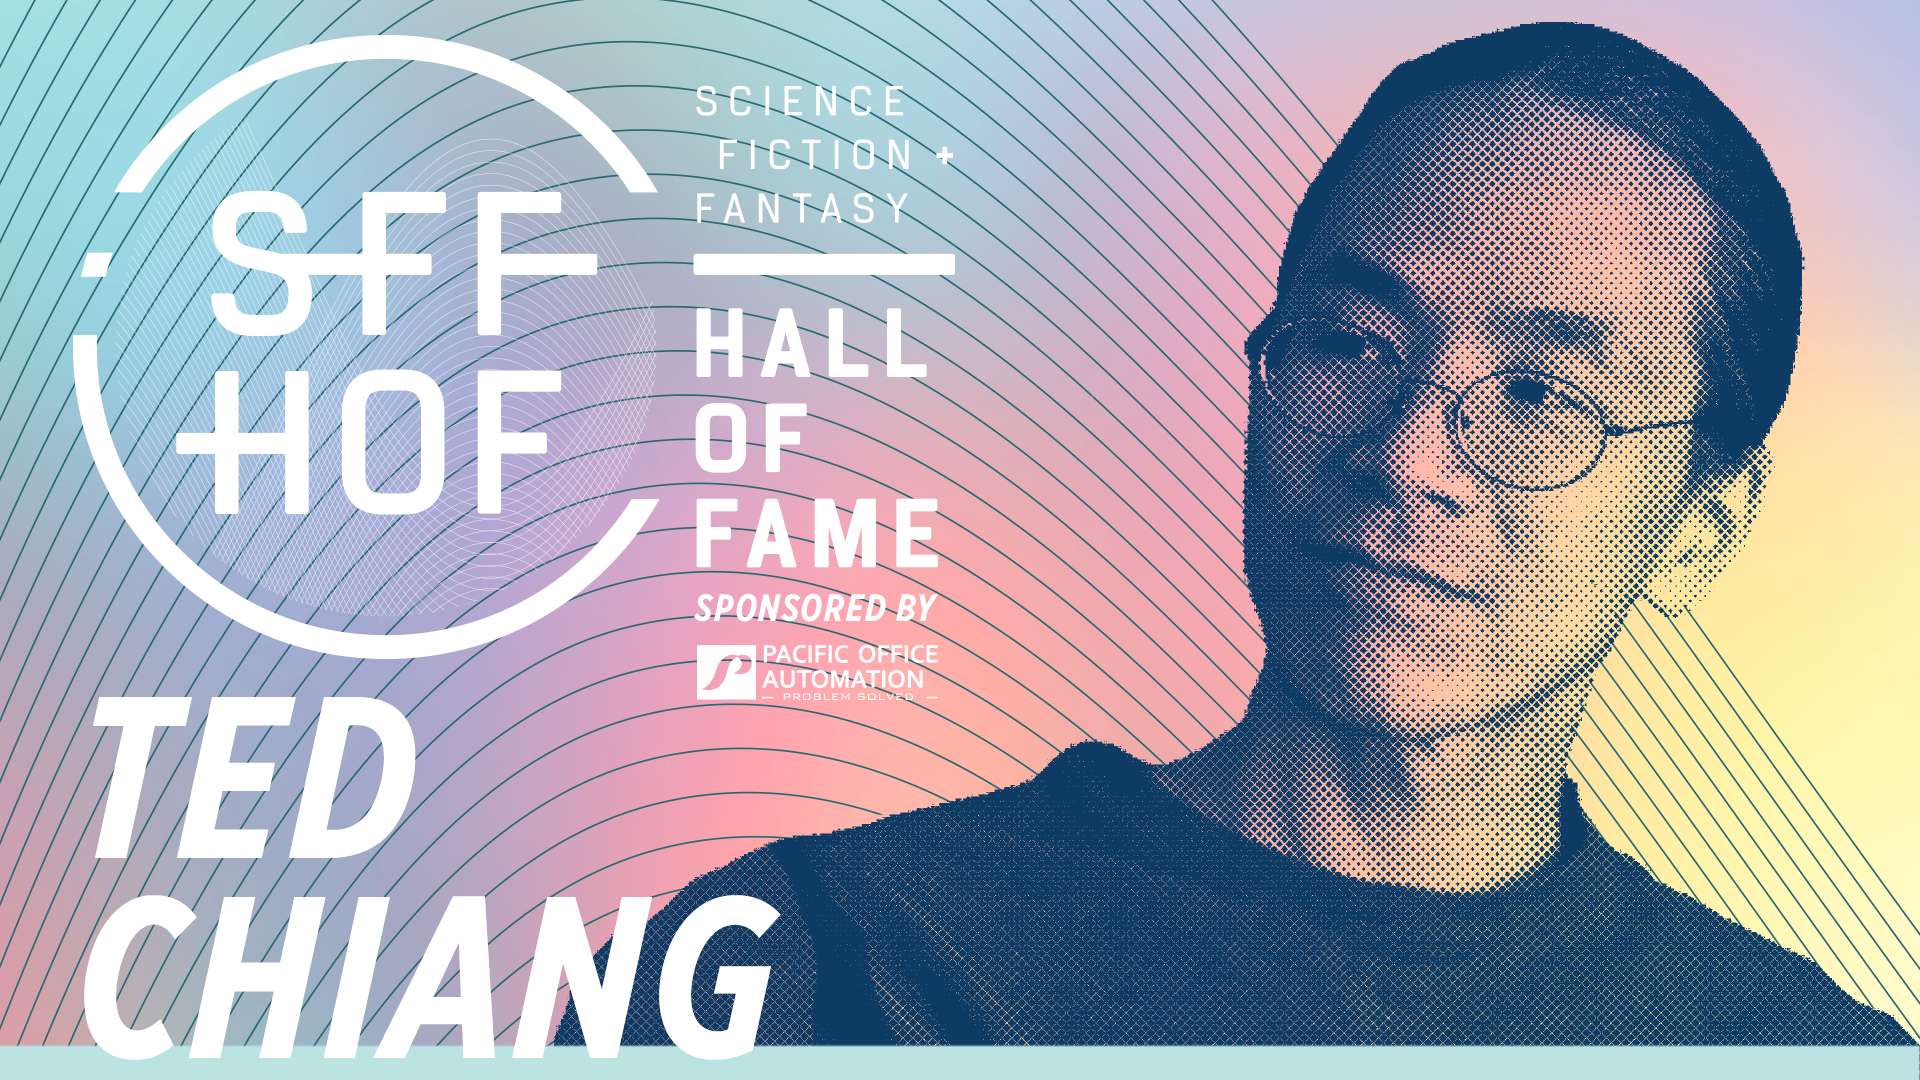 MoPOP Science Fiction + Fantasy Hall of Fame inductee graphic for Ted Chiang